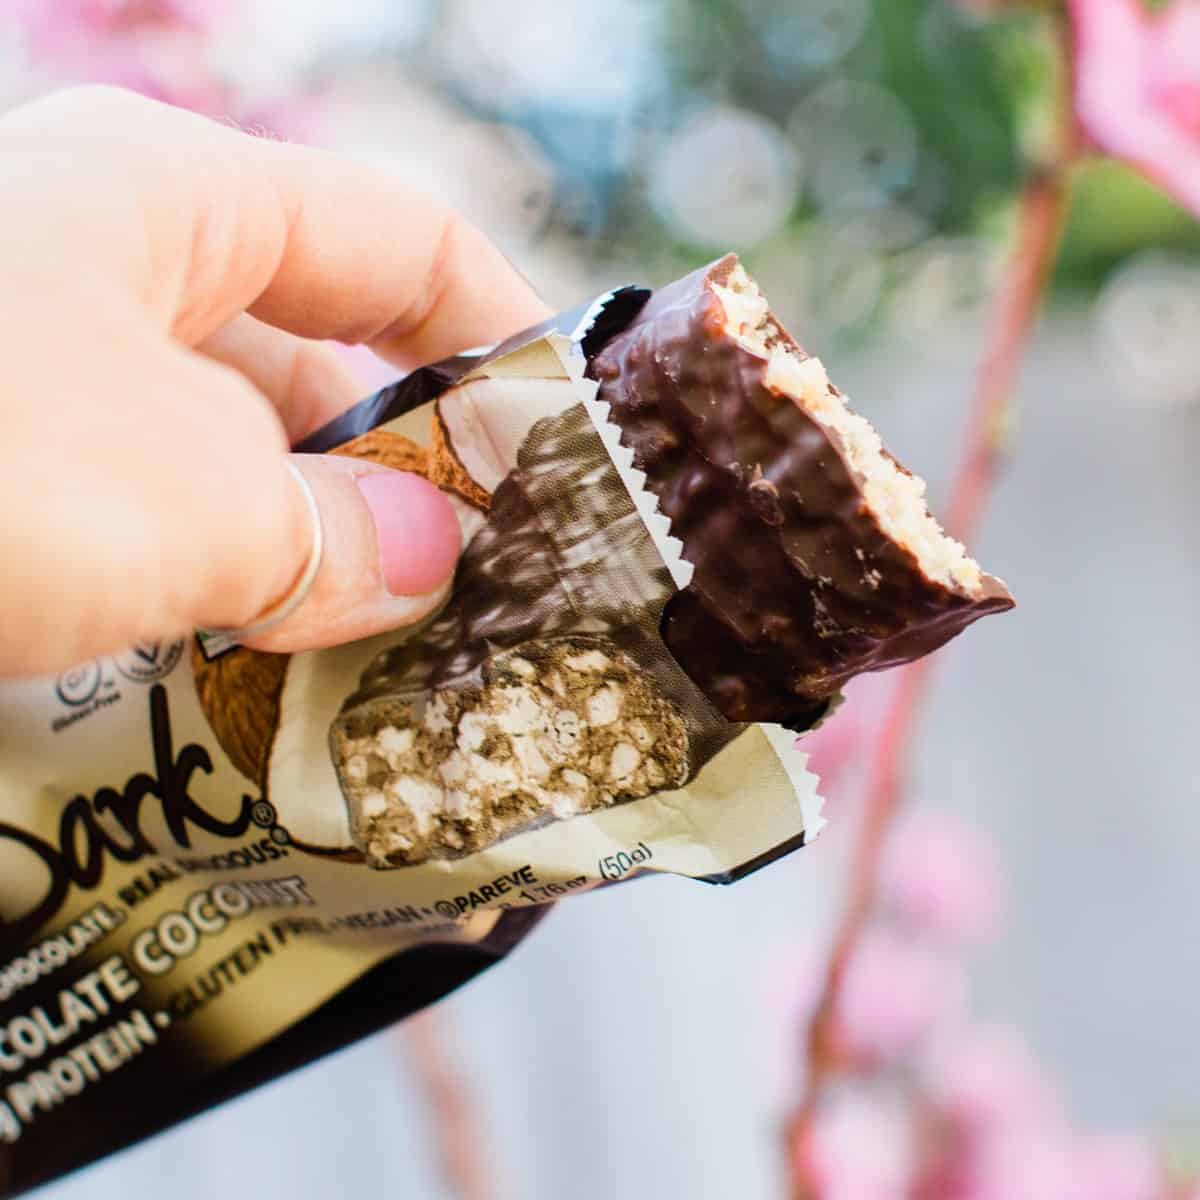 Vegan protein bar from Nugo opened showing chocolate covered inside.